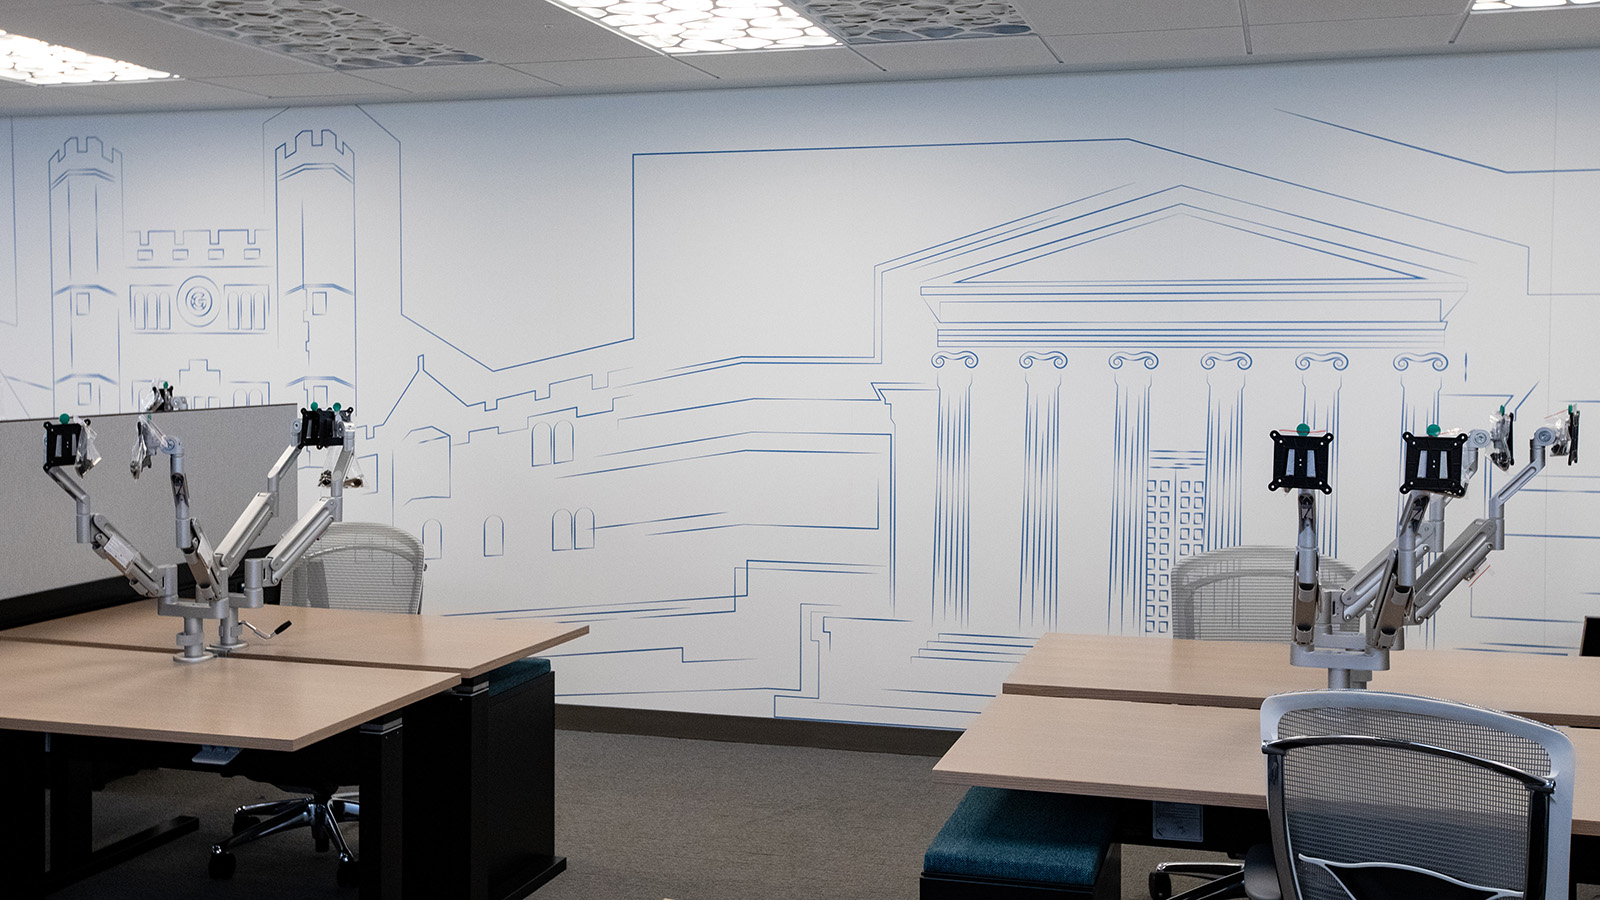 Photo of desks and wall mural depicting sketches of campus buildings